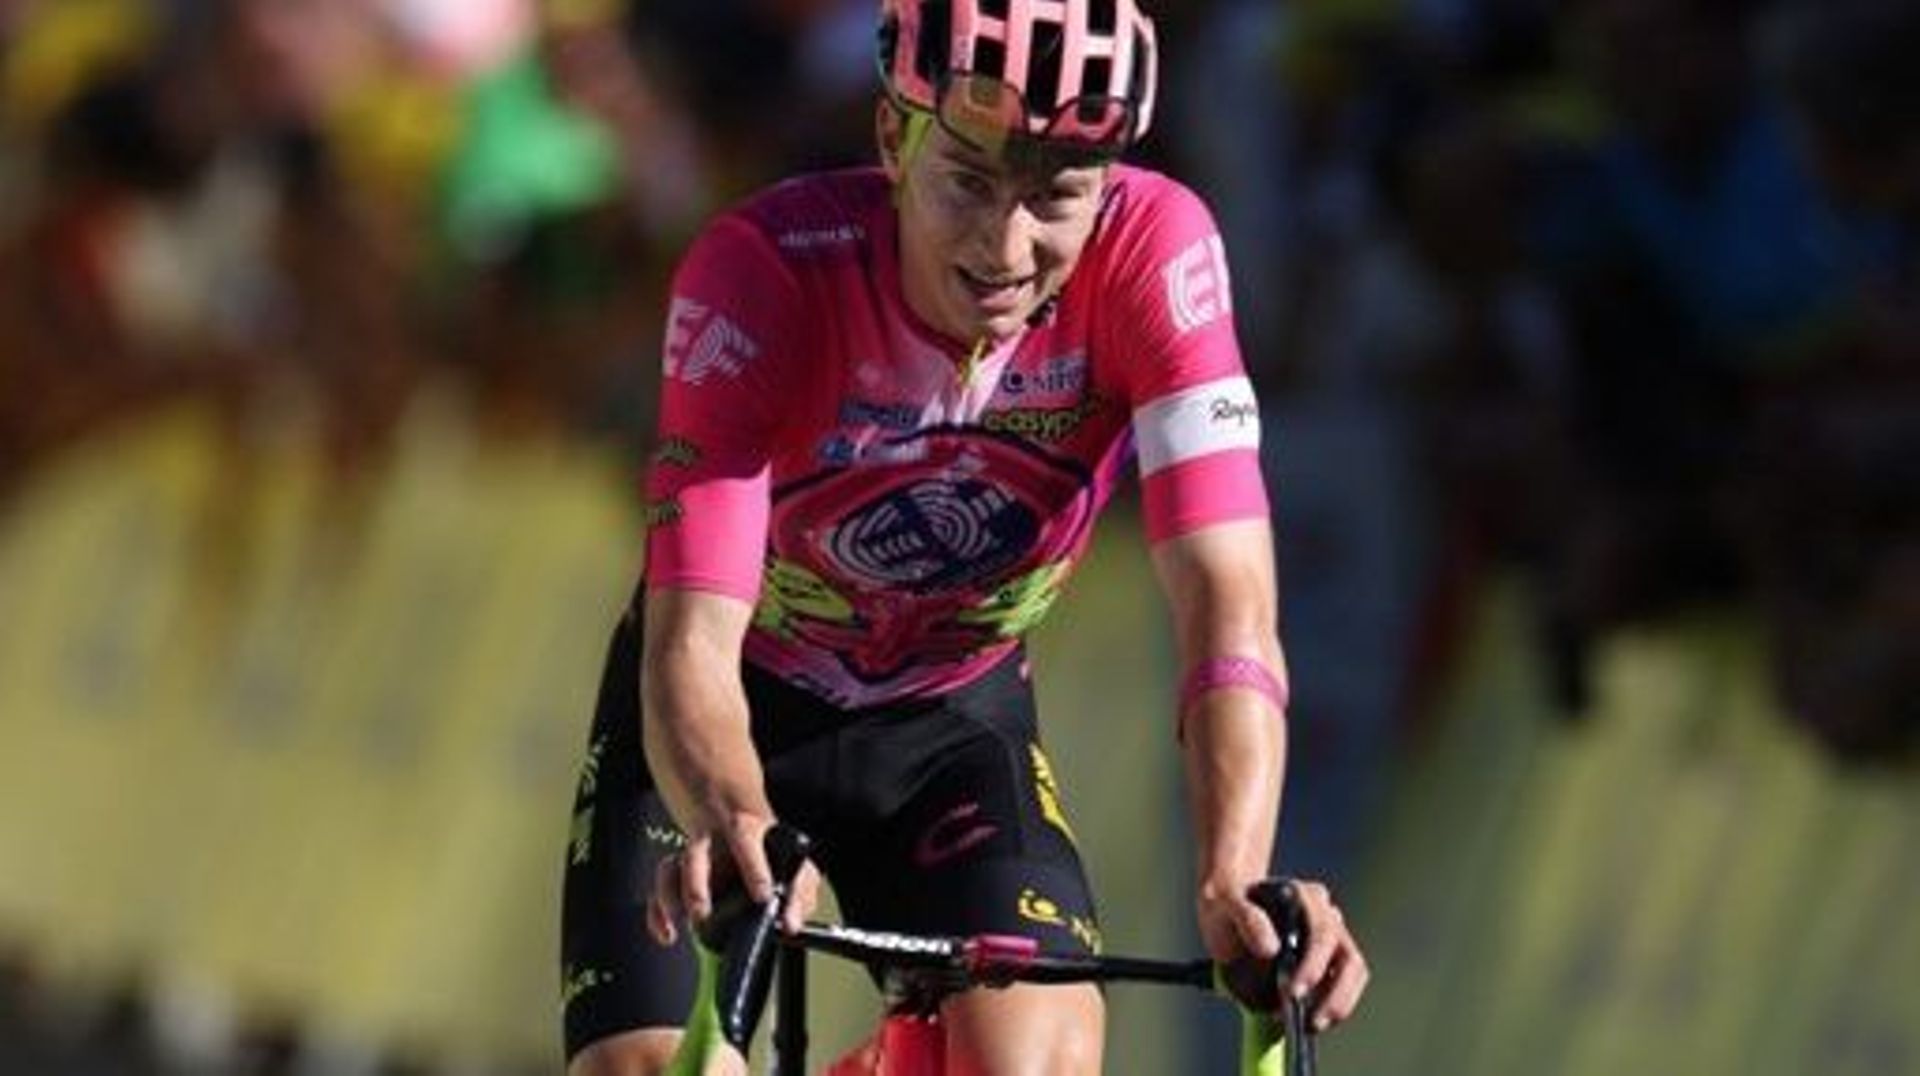 EF Education-Easypost team's American rider Neilson Powless cycles in the final meters of the 12th stage of the 109th edition of the Tour de France cycling race, 165,1 km between Briancon and L'Alpe-d'Huez, in the French Alps, on July 14, 2022.  Thomas SA